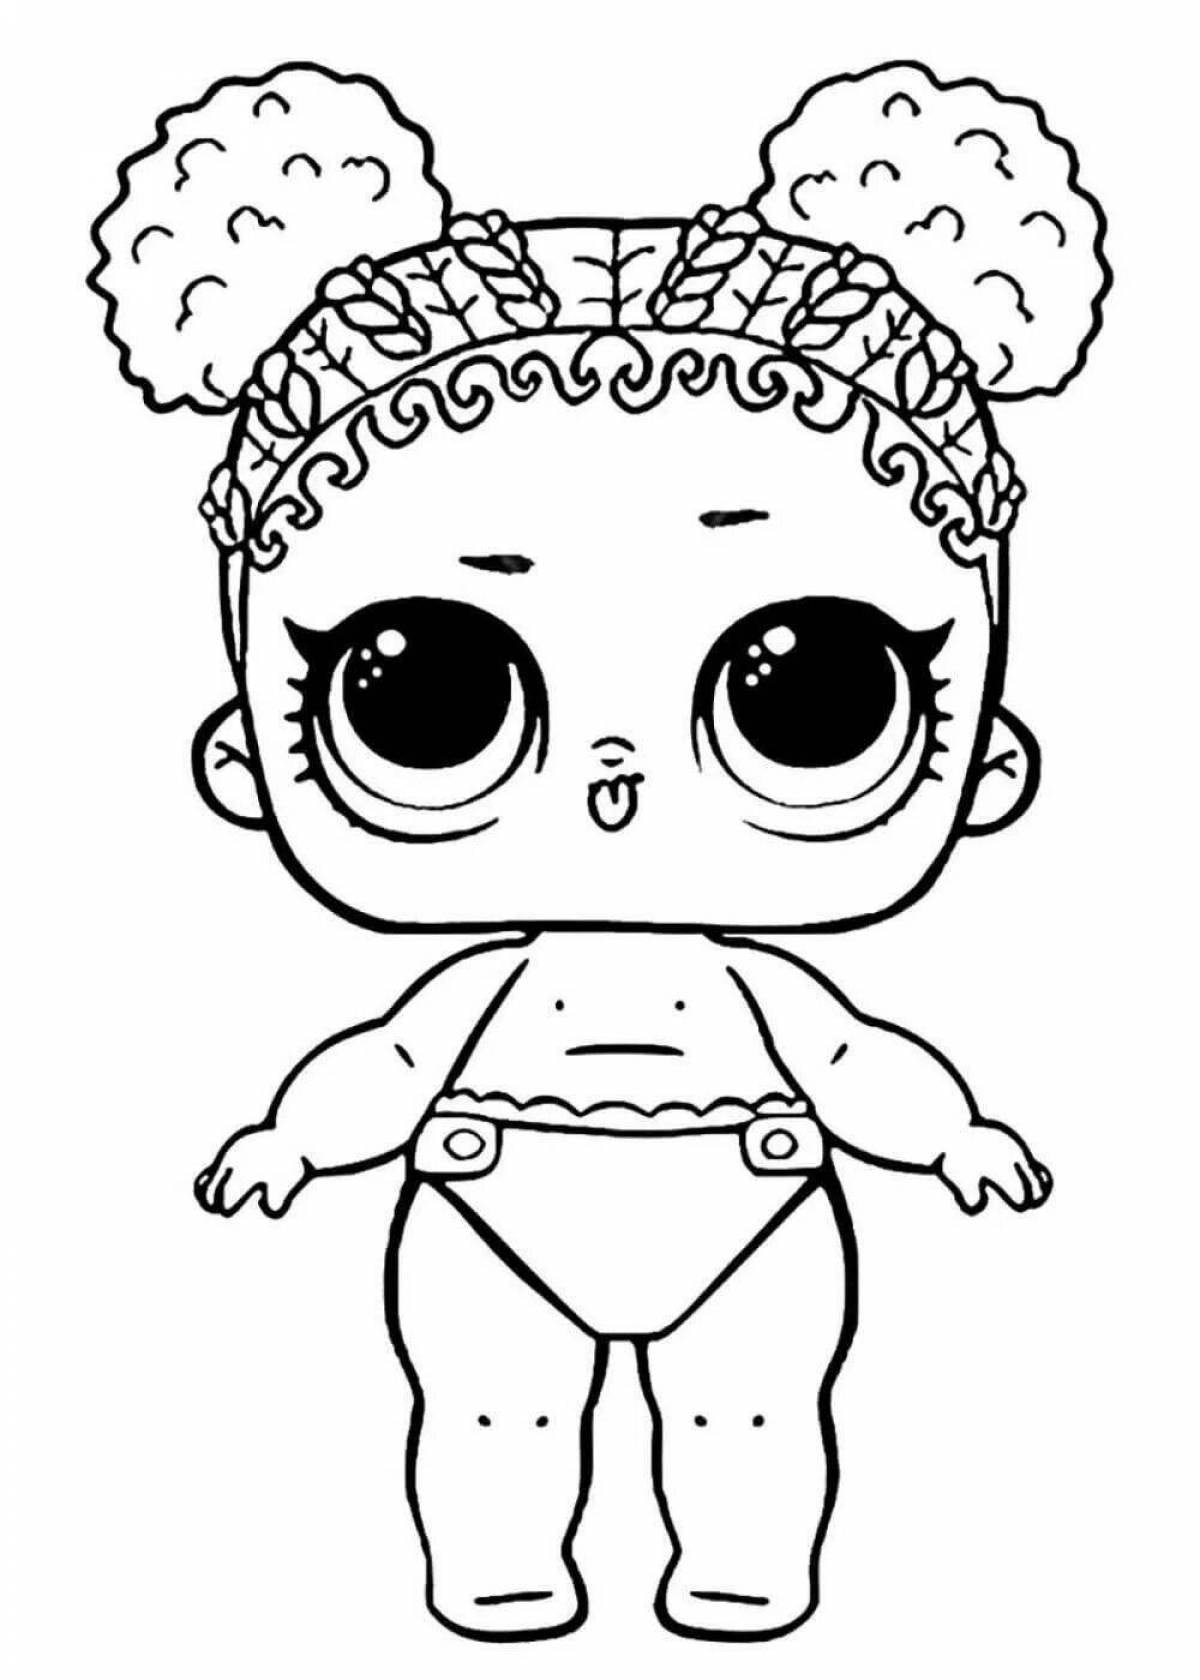 Furry little lol doll coloring book